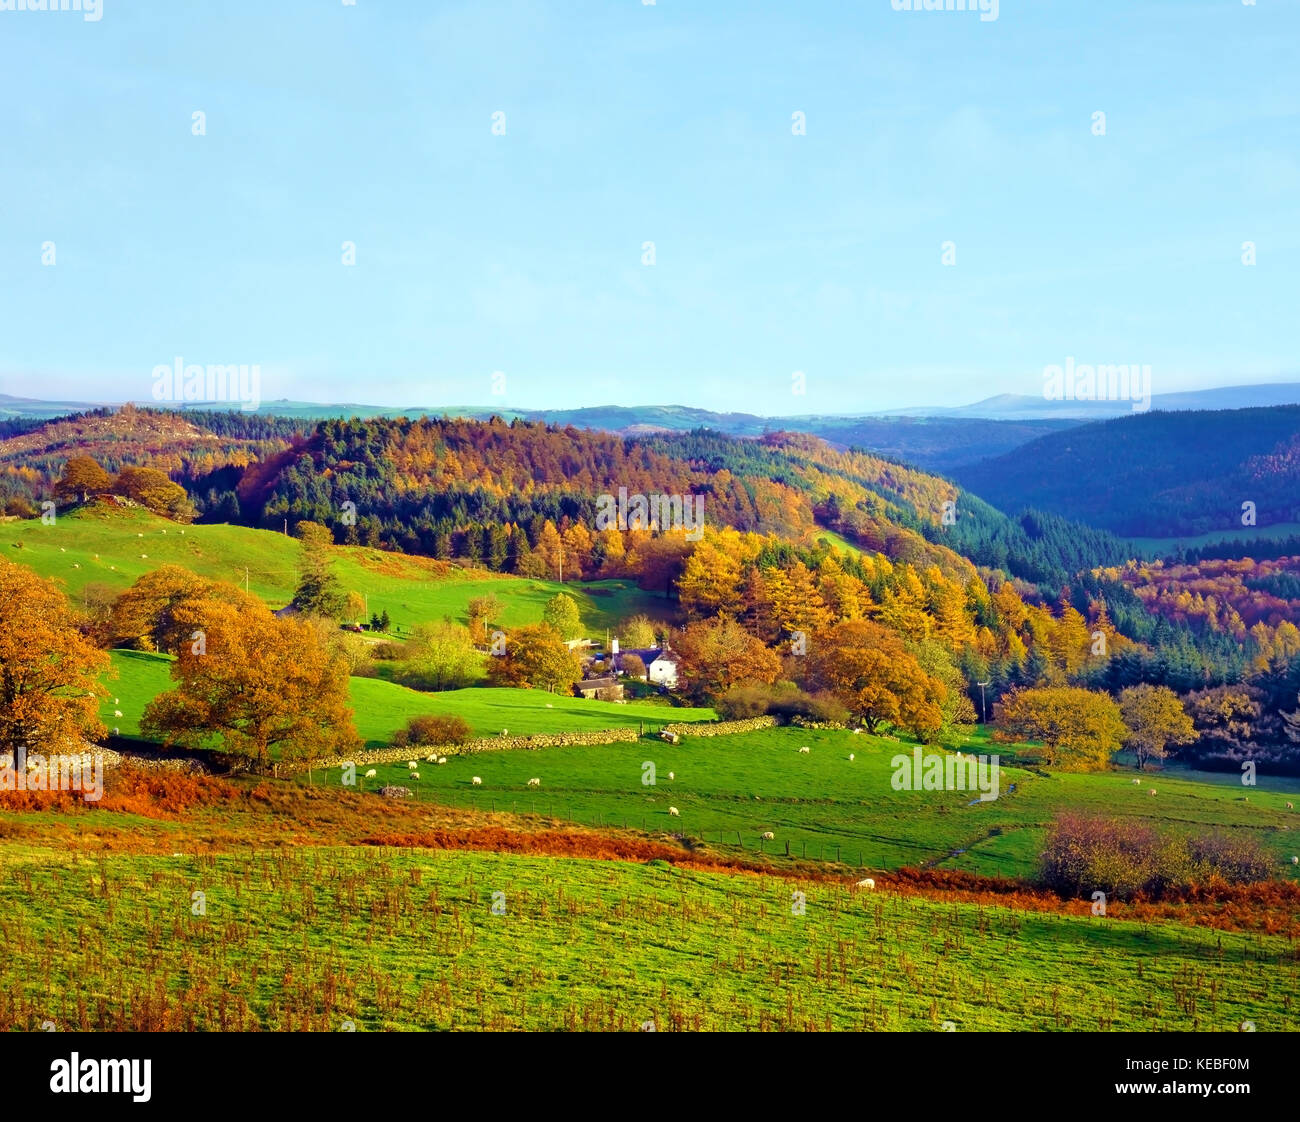 An autumn view of the Snowdonia landscape in North Wales, UK Stock Photo